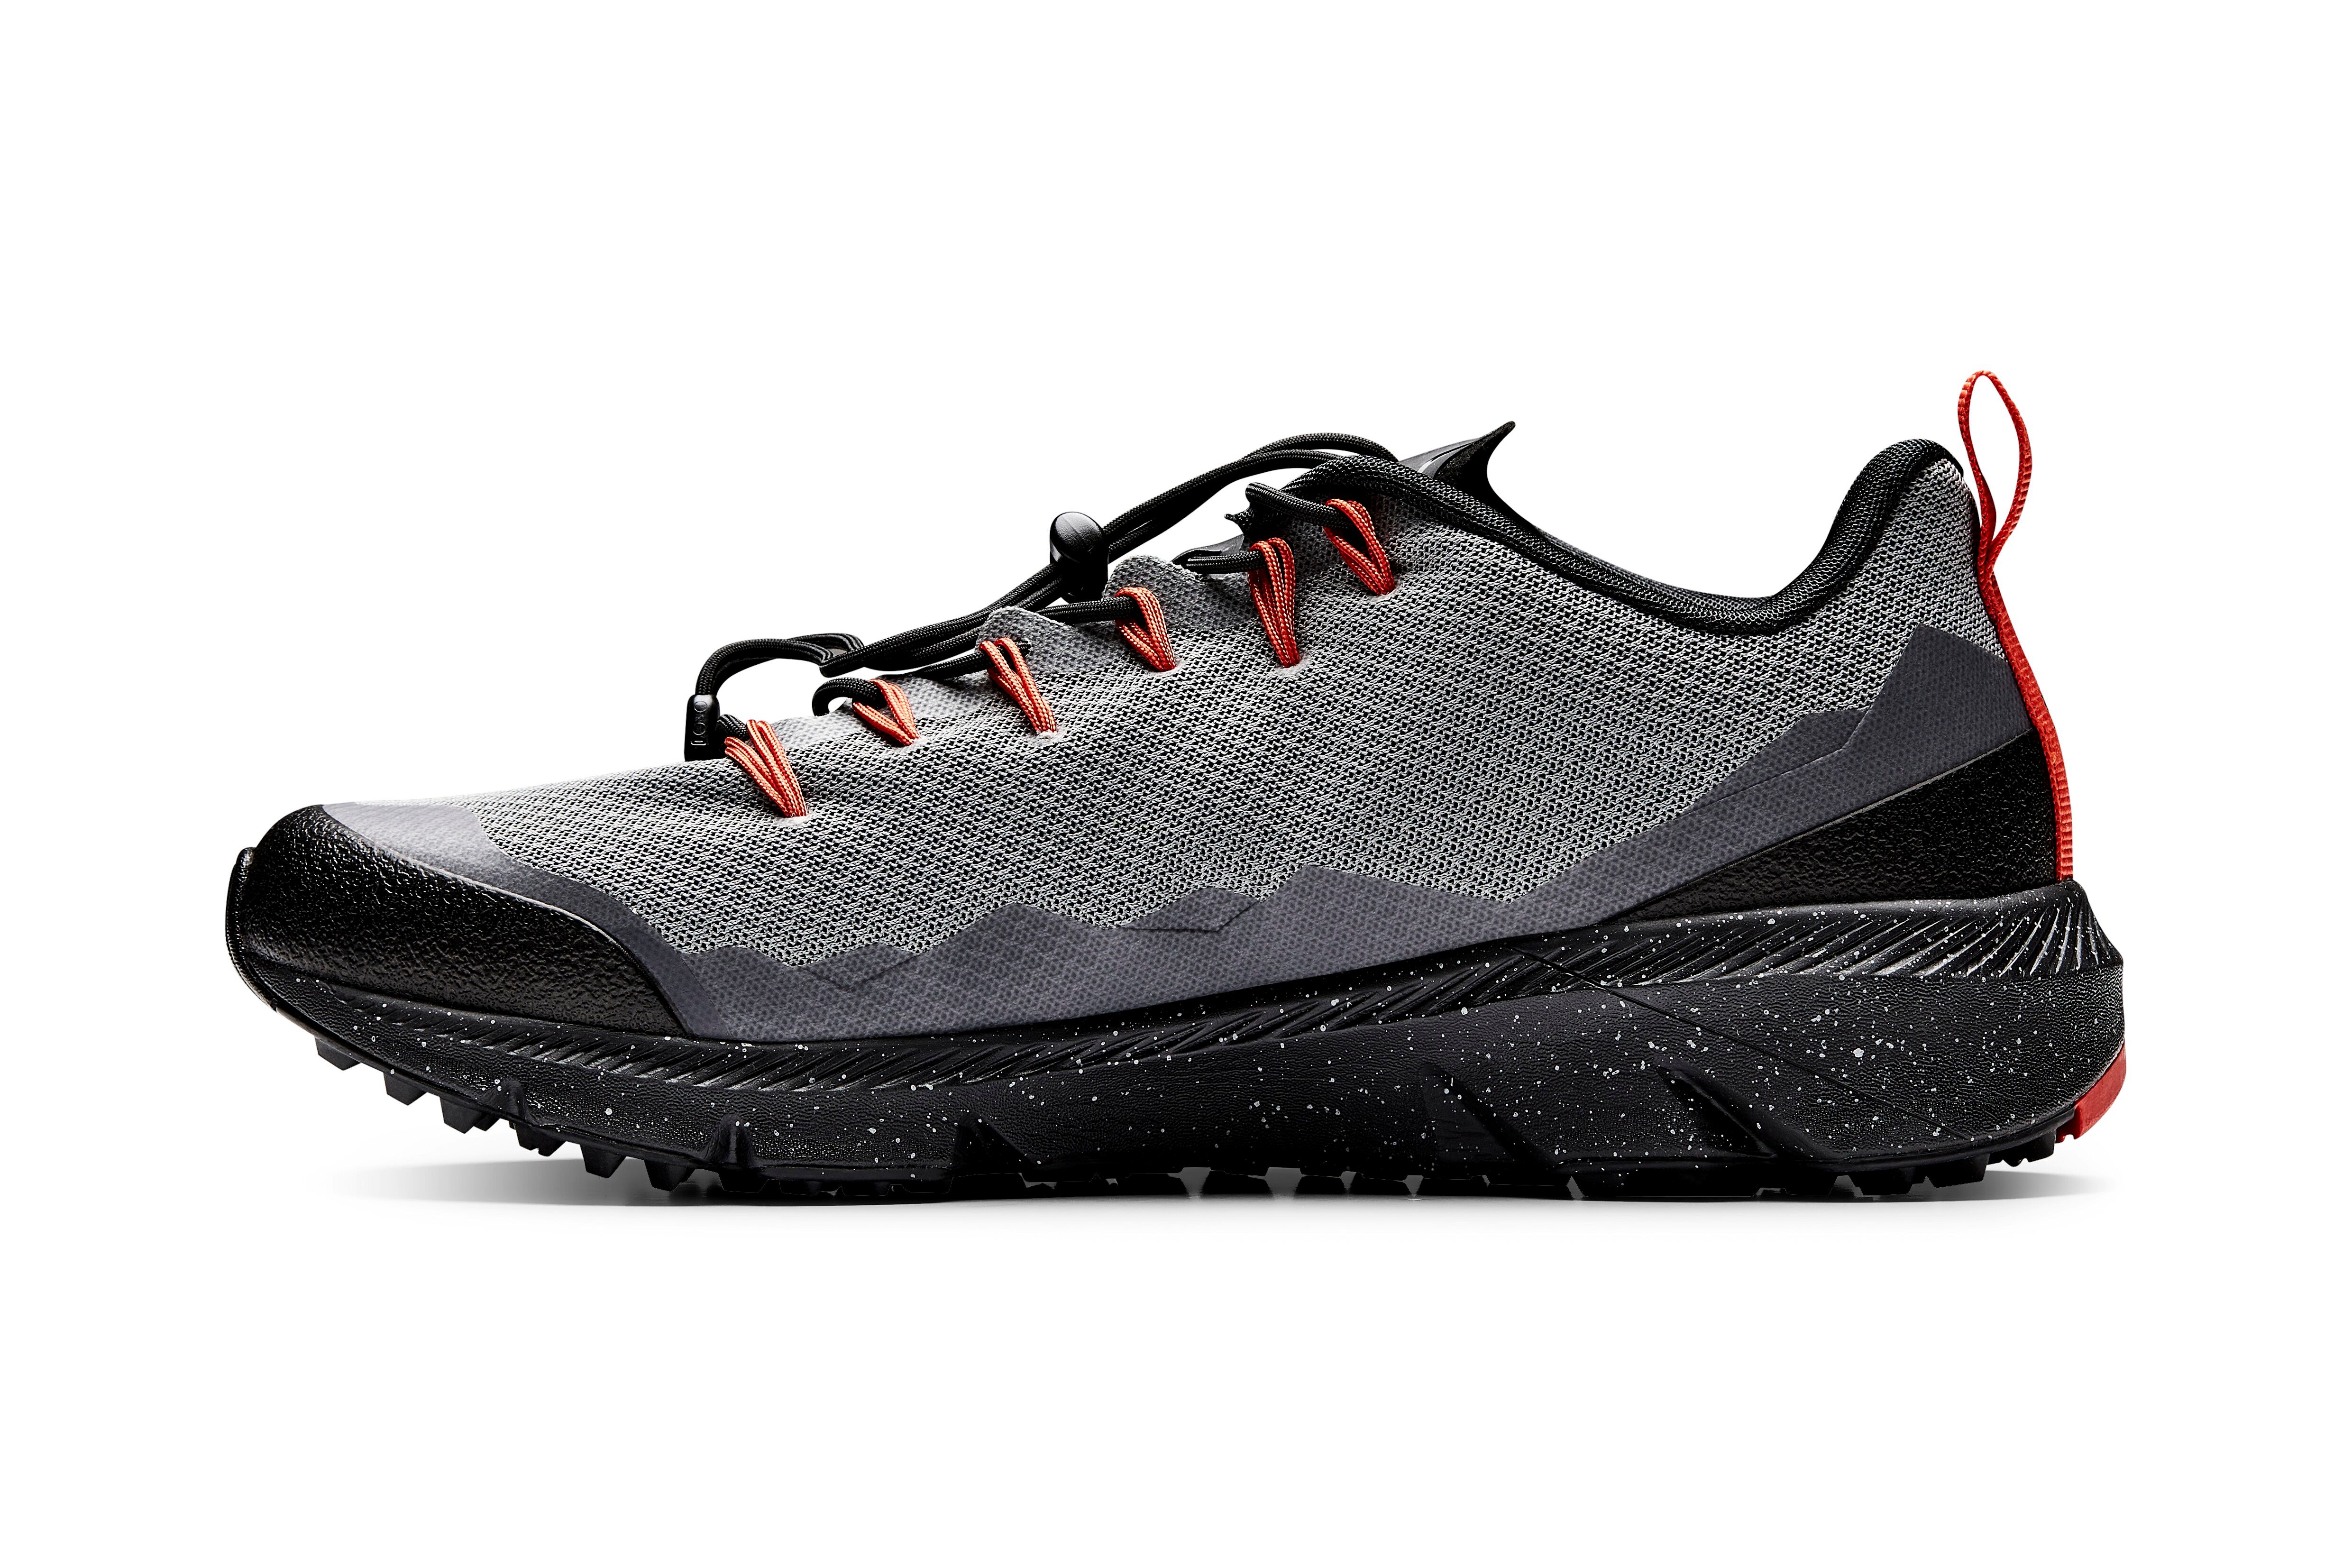 Craft Nordic Speed - Trail running shoes - Men's